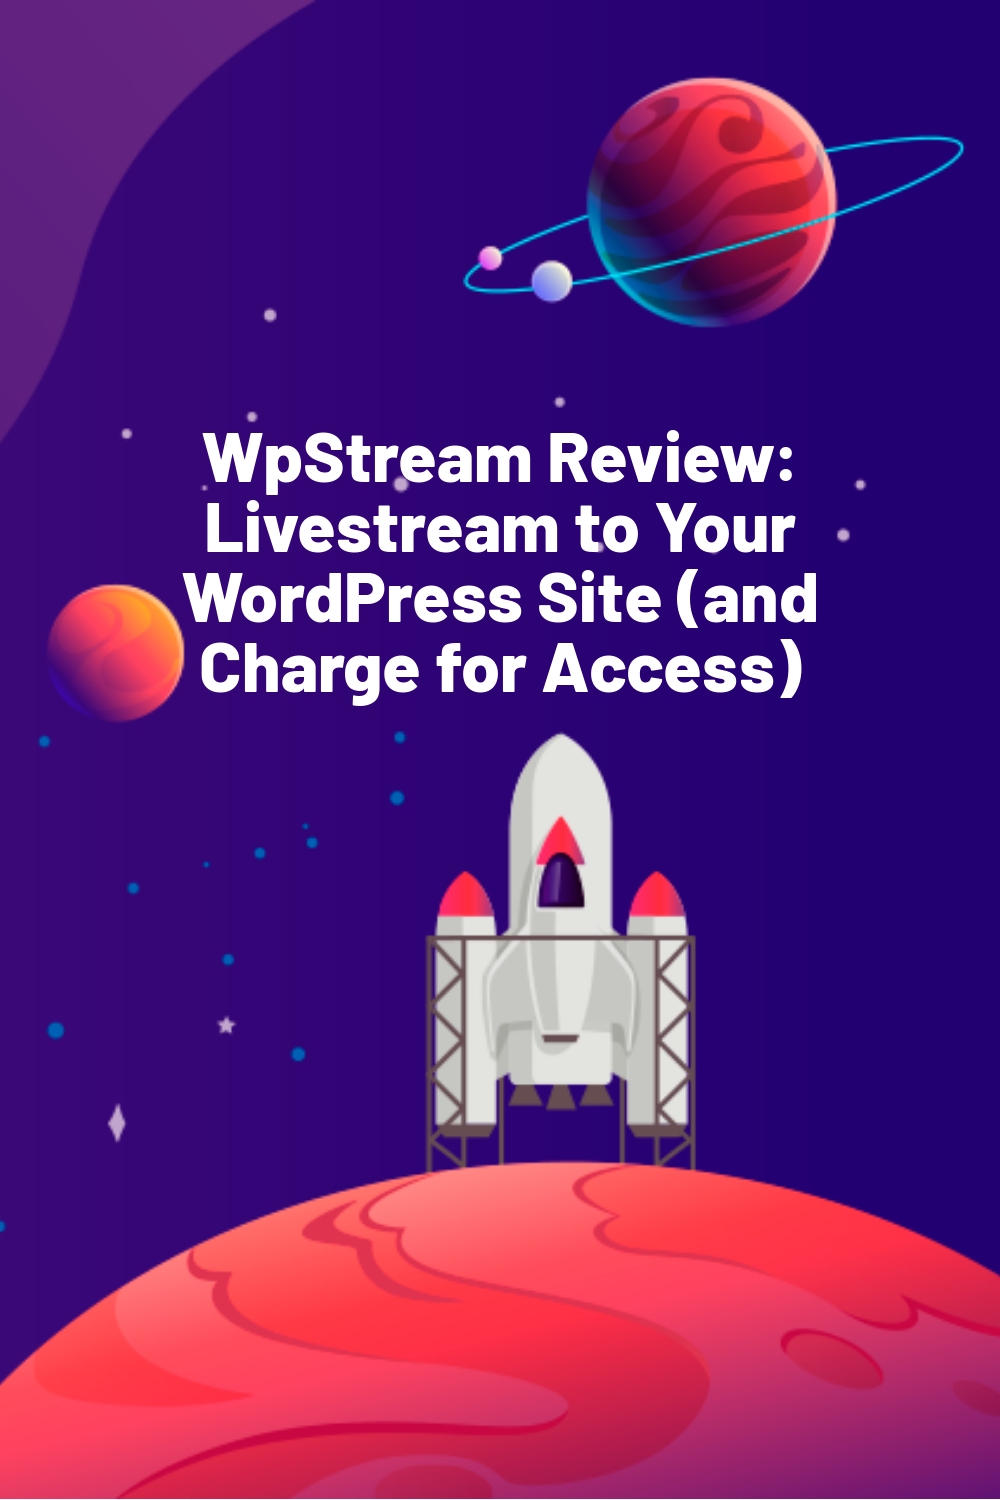 WpStream Review: Livestream to Your WordPress Site (and Charge for Access)